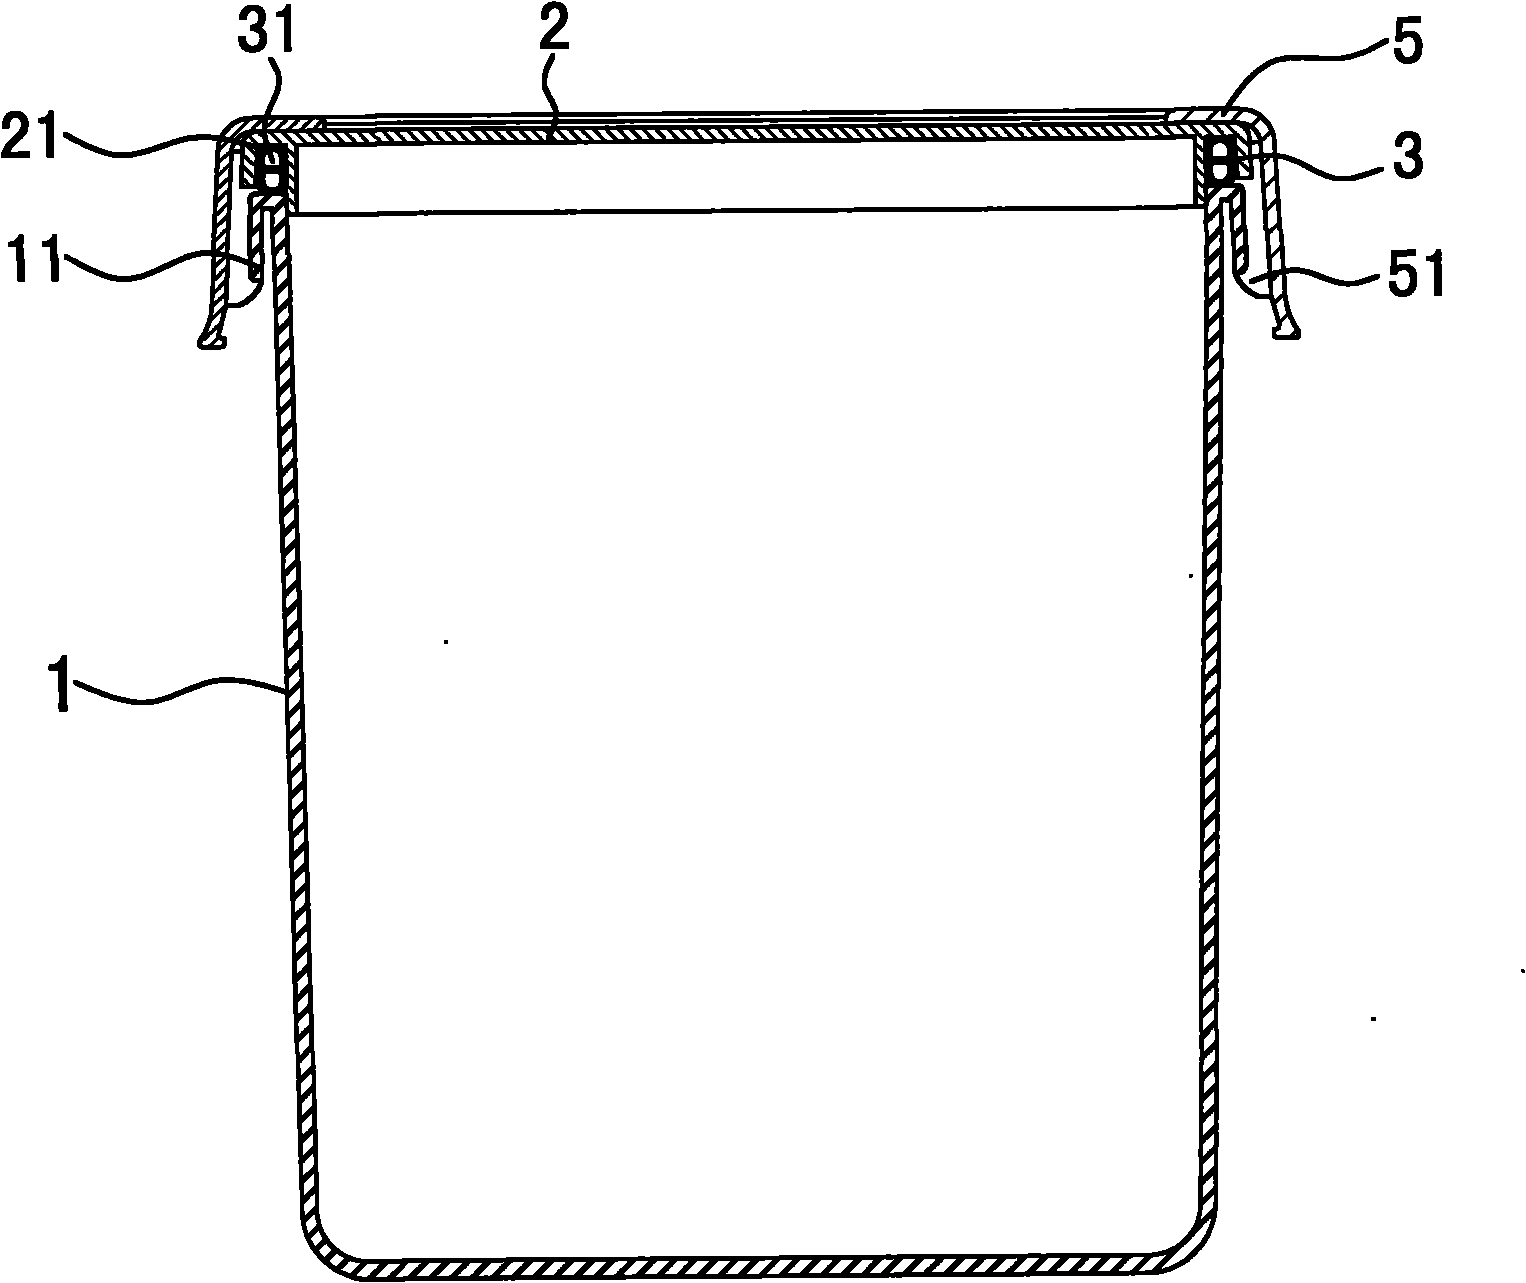 Double-cover buckled-type plastic preservation box